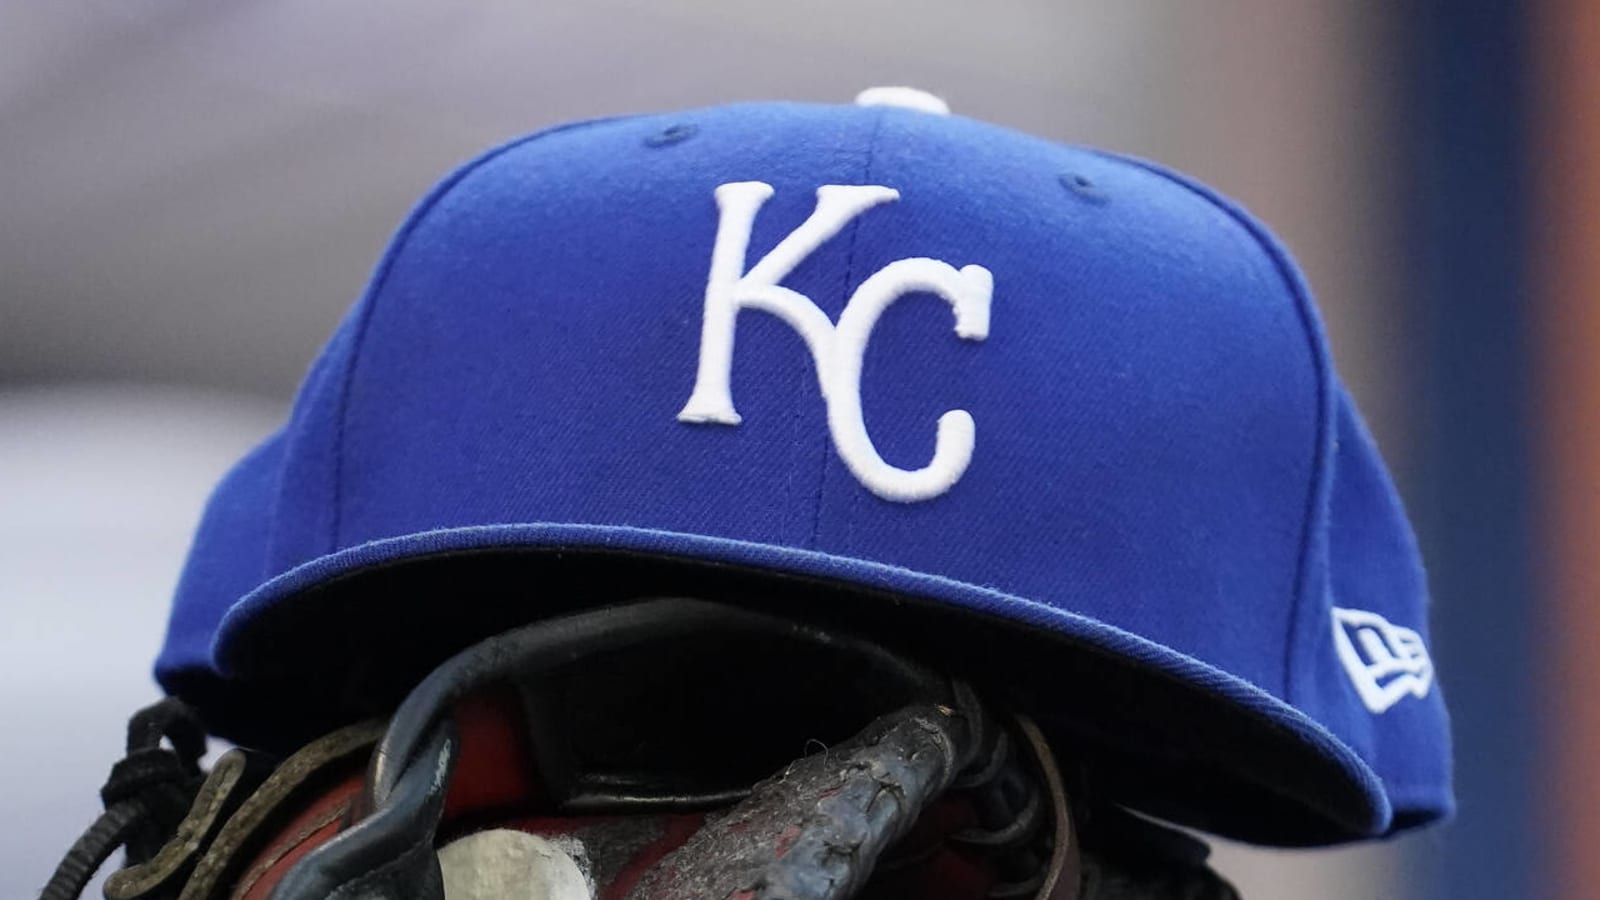 Royals looking to add righty bat, open to dealing from MLB roster